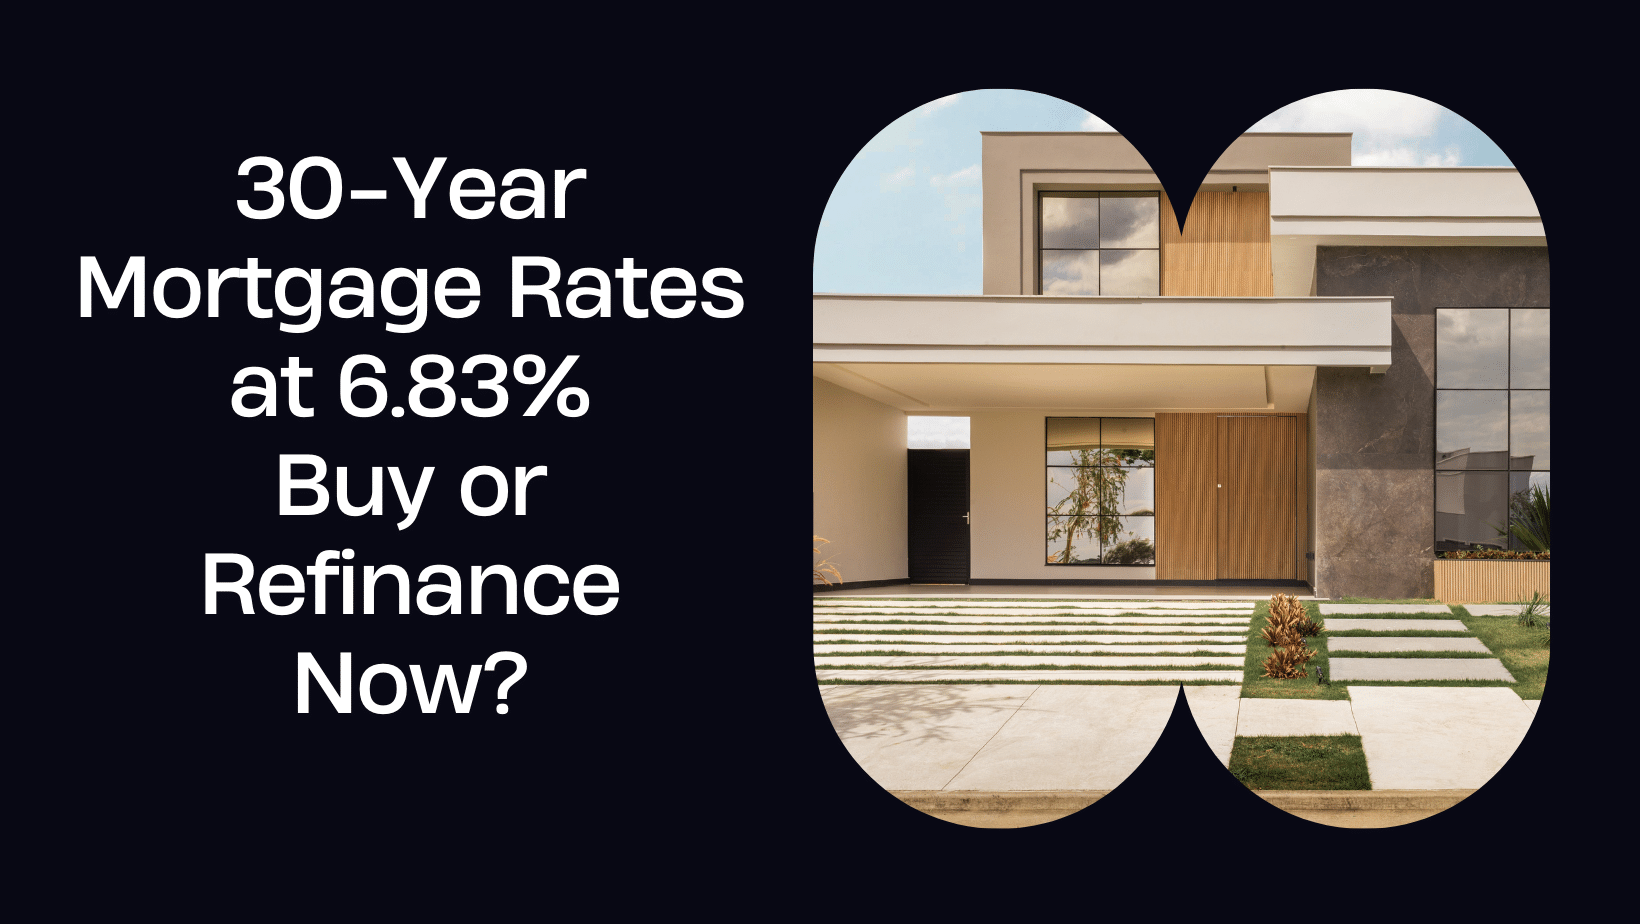 30 Year Mortgage Rates at 6.83 Buy or Refinance Now